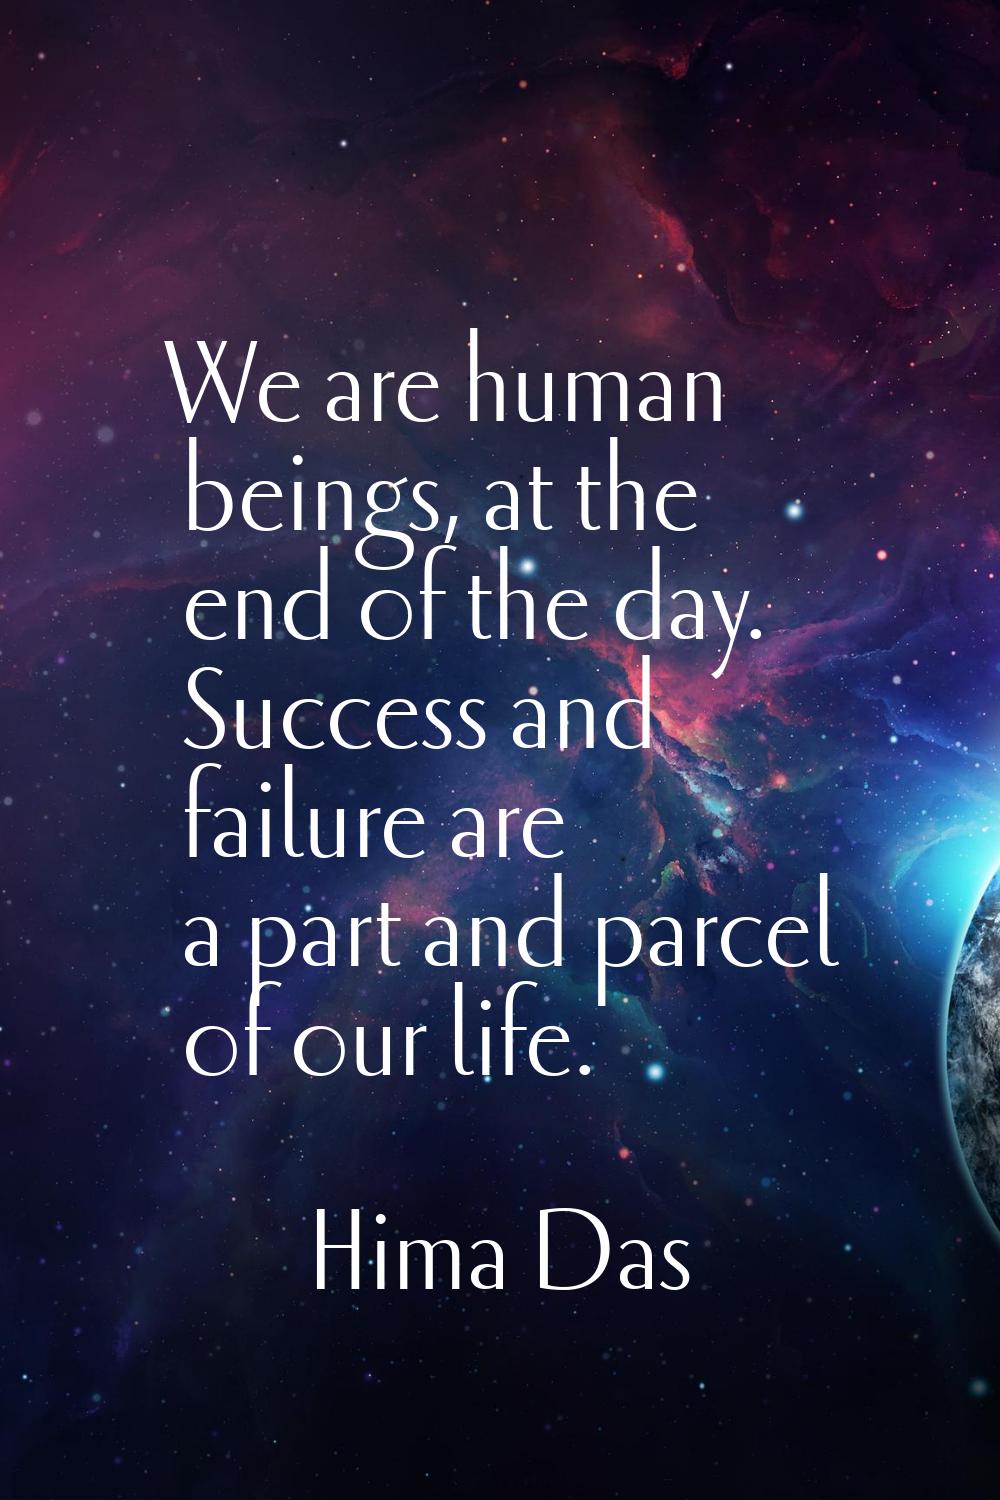 We are human beings, at the end of the day. Success and failure are a part and parcel of our life.